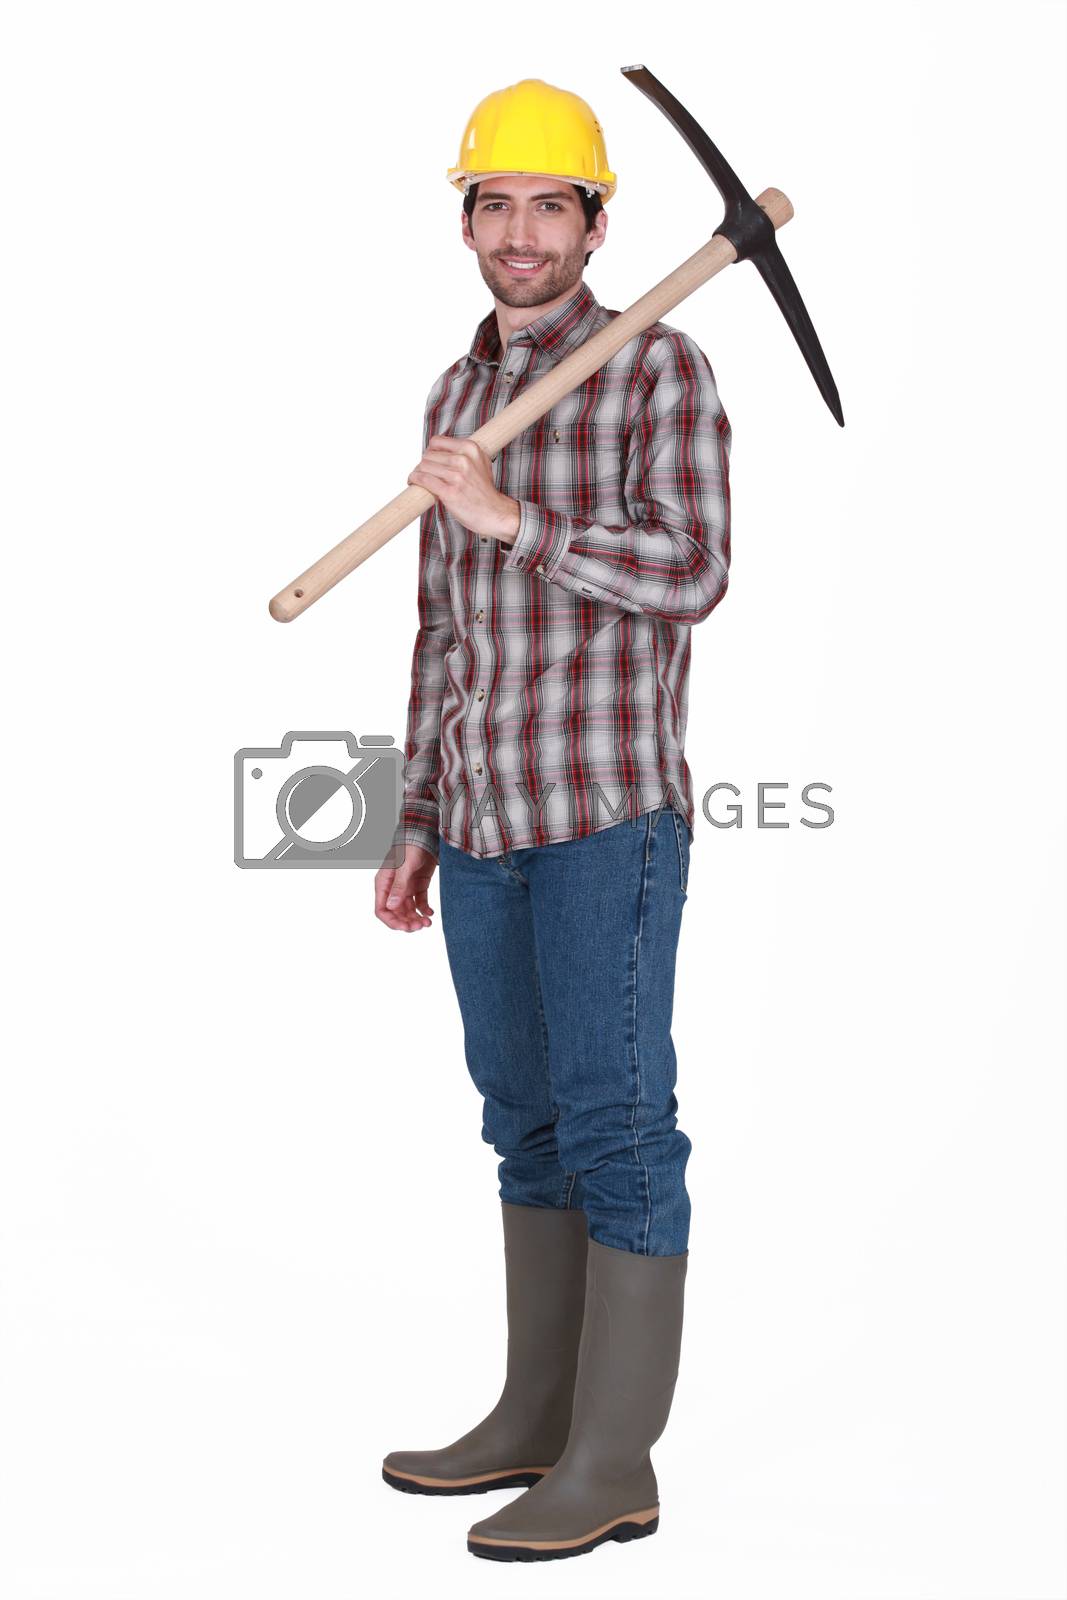 Royalty free image of Labourer carrying a pickaxe by phovoir